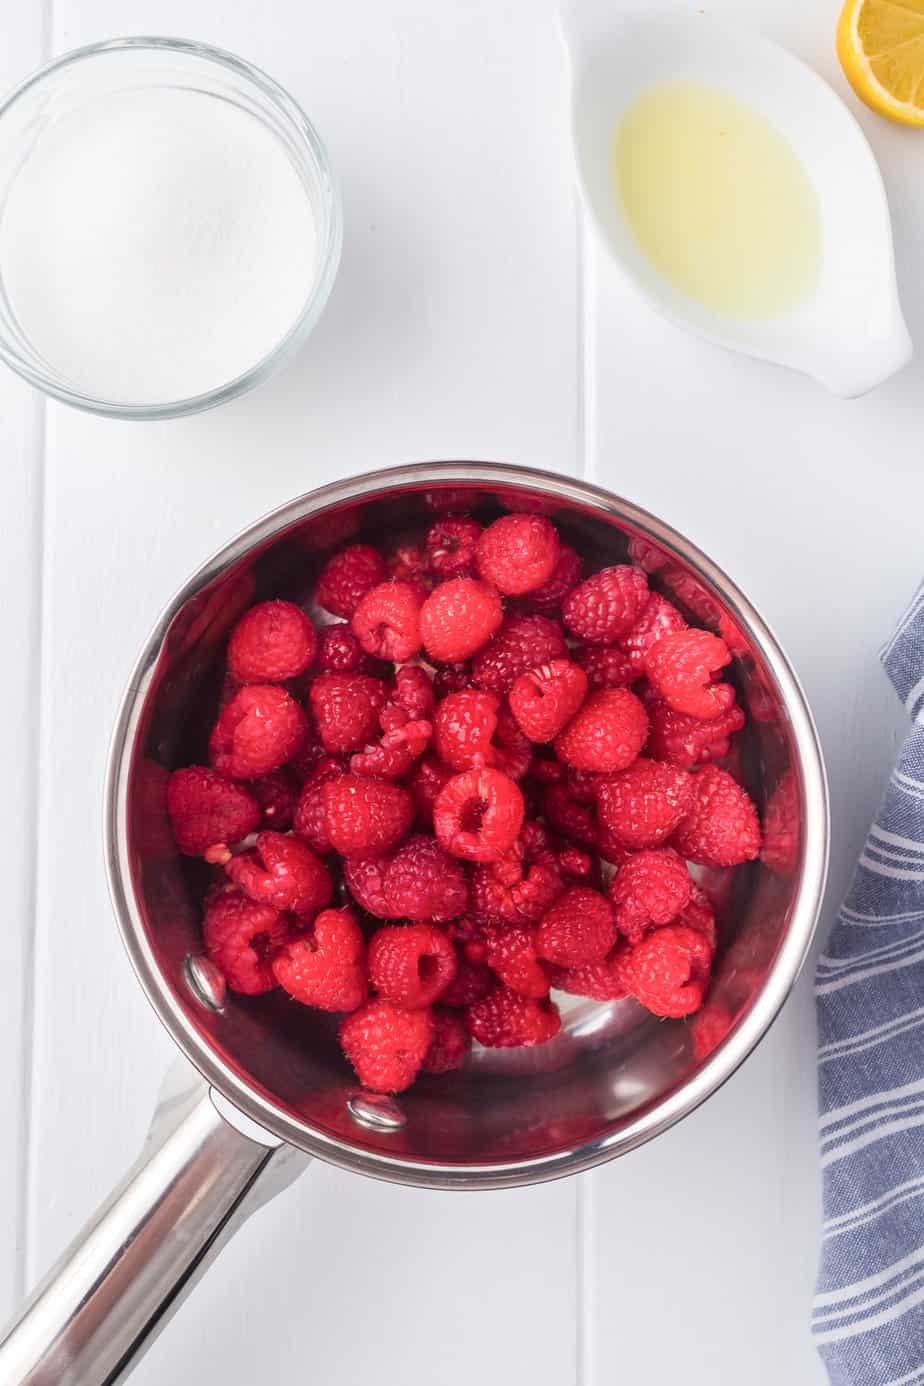 Raspberries in a pan with sugar and lemon juice nearby on the counter.